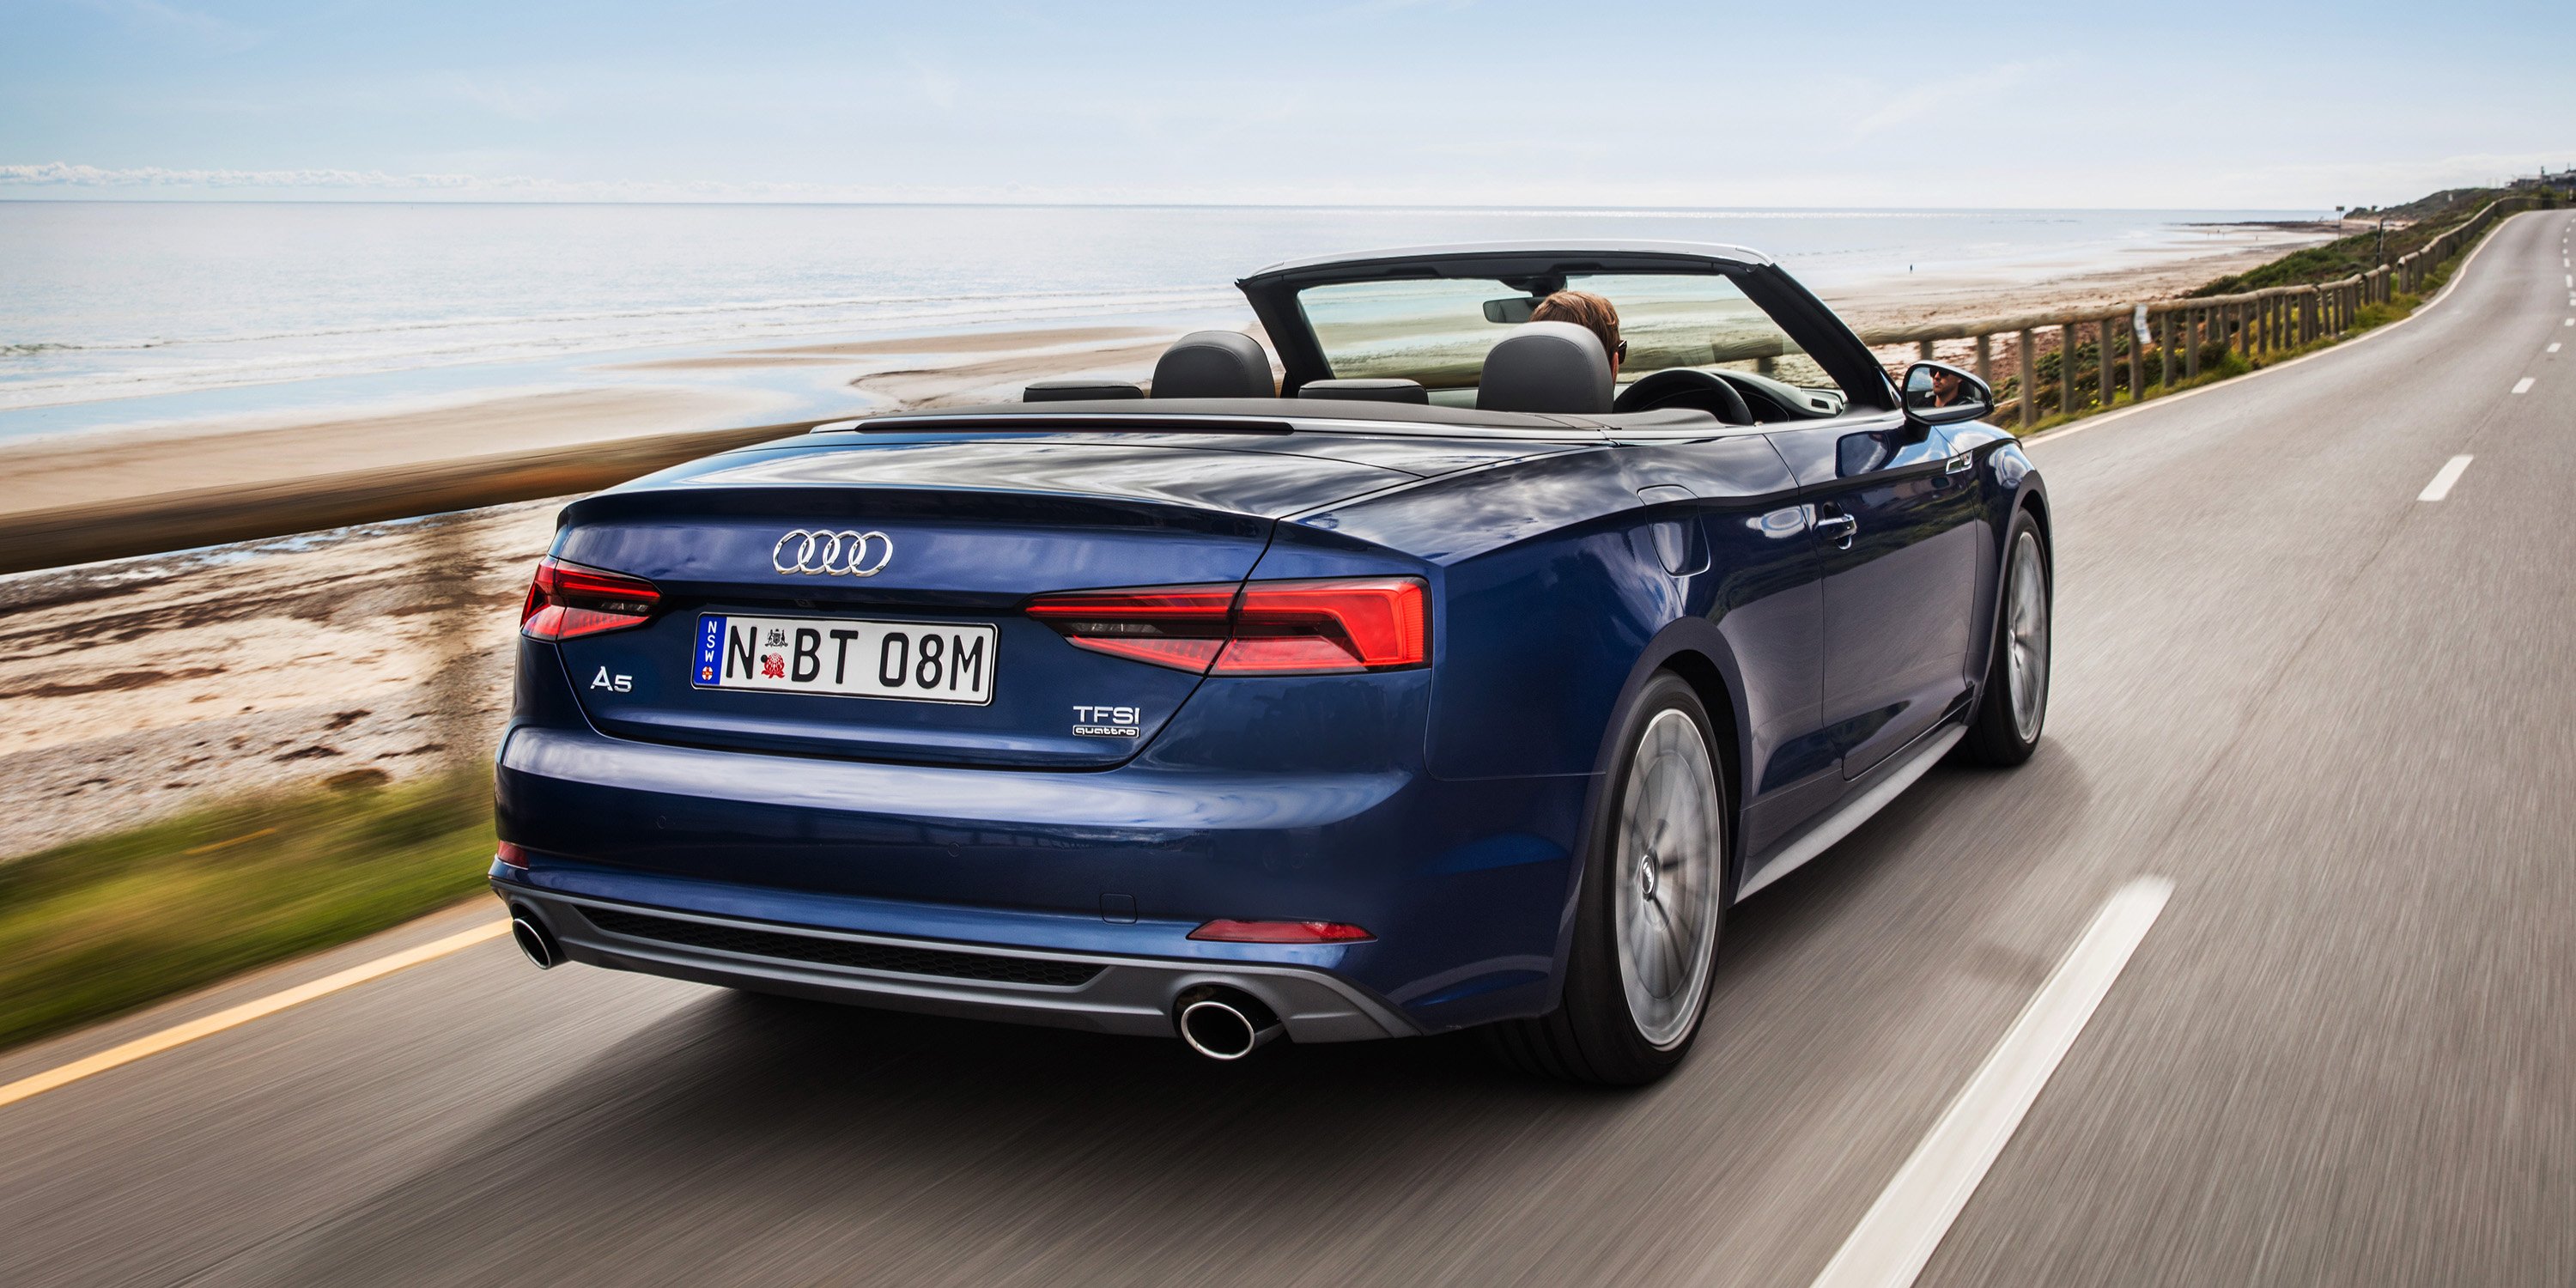 2018 Audi A5 & S5 Cabriolet pricing and specs - Photos (1 ...